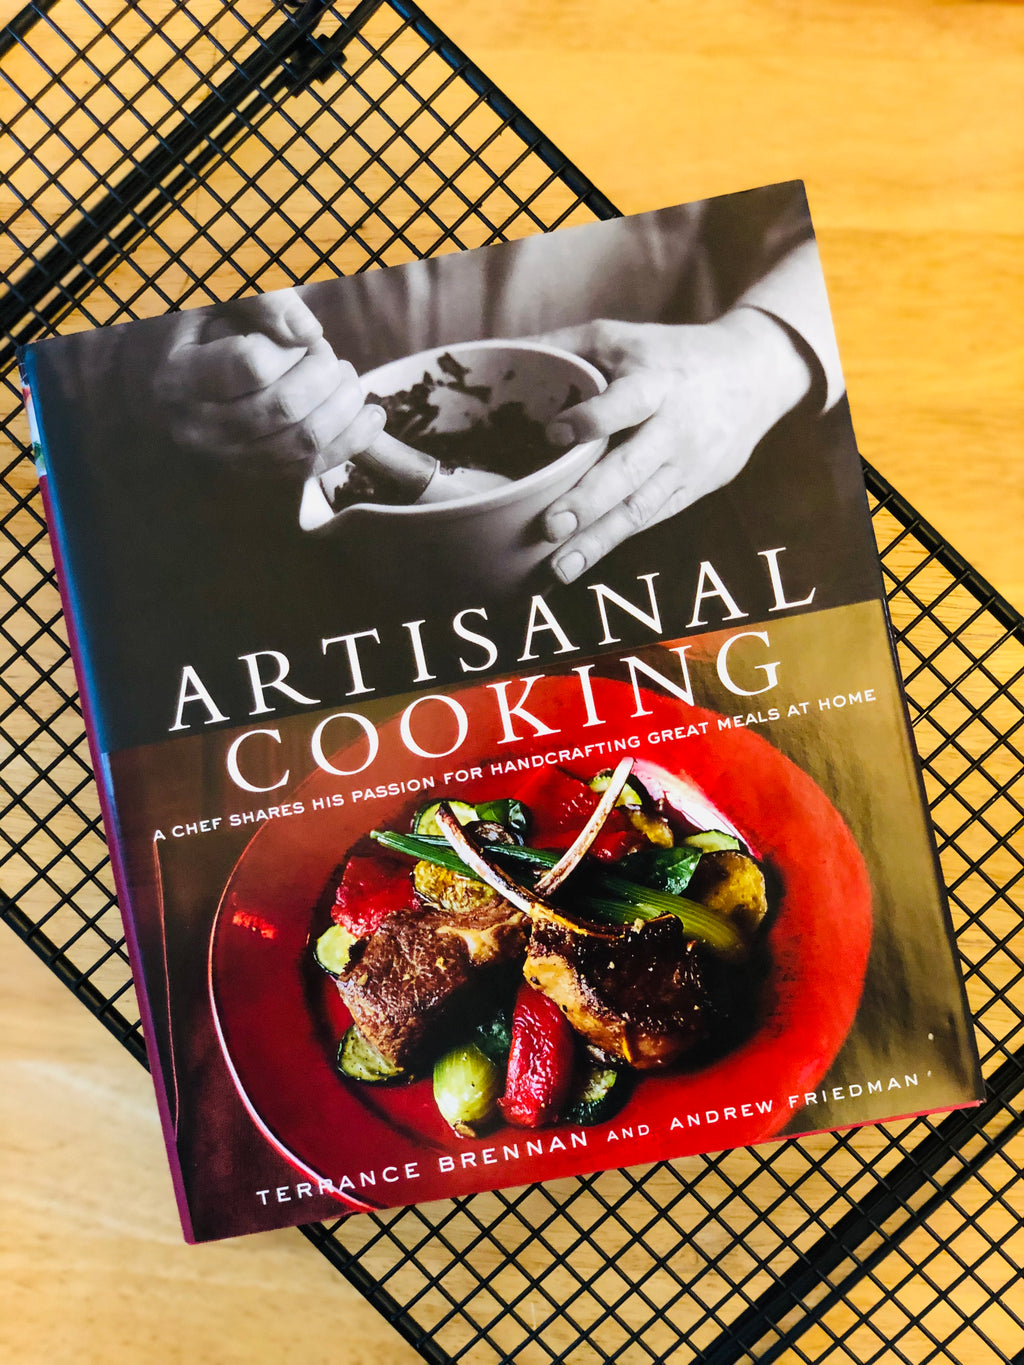 Artisanal Cooking- By Terrance Brennan and Andrew Friedman